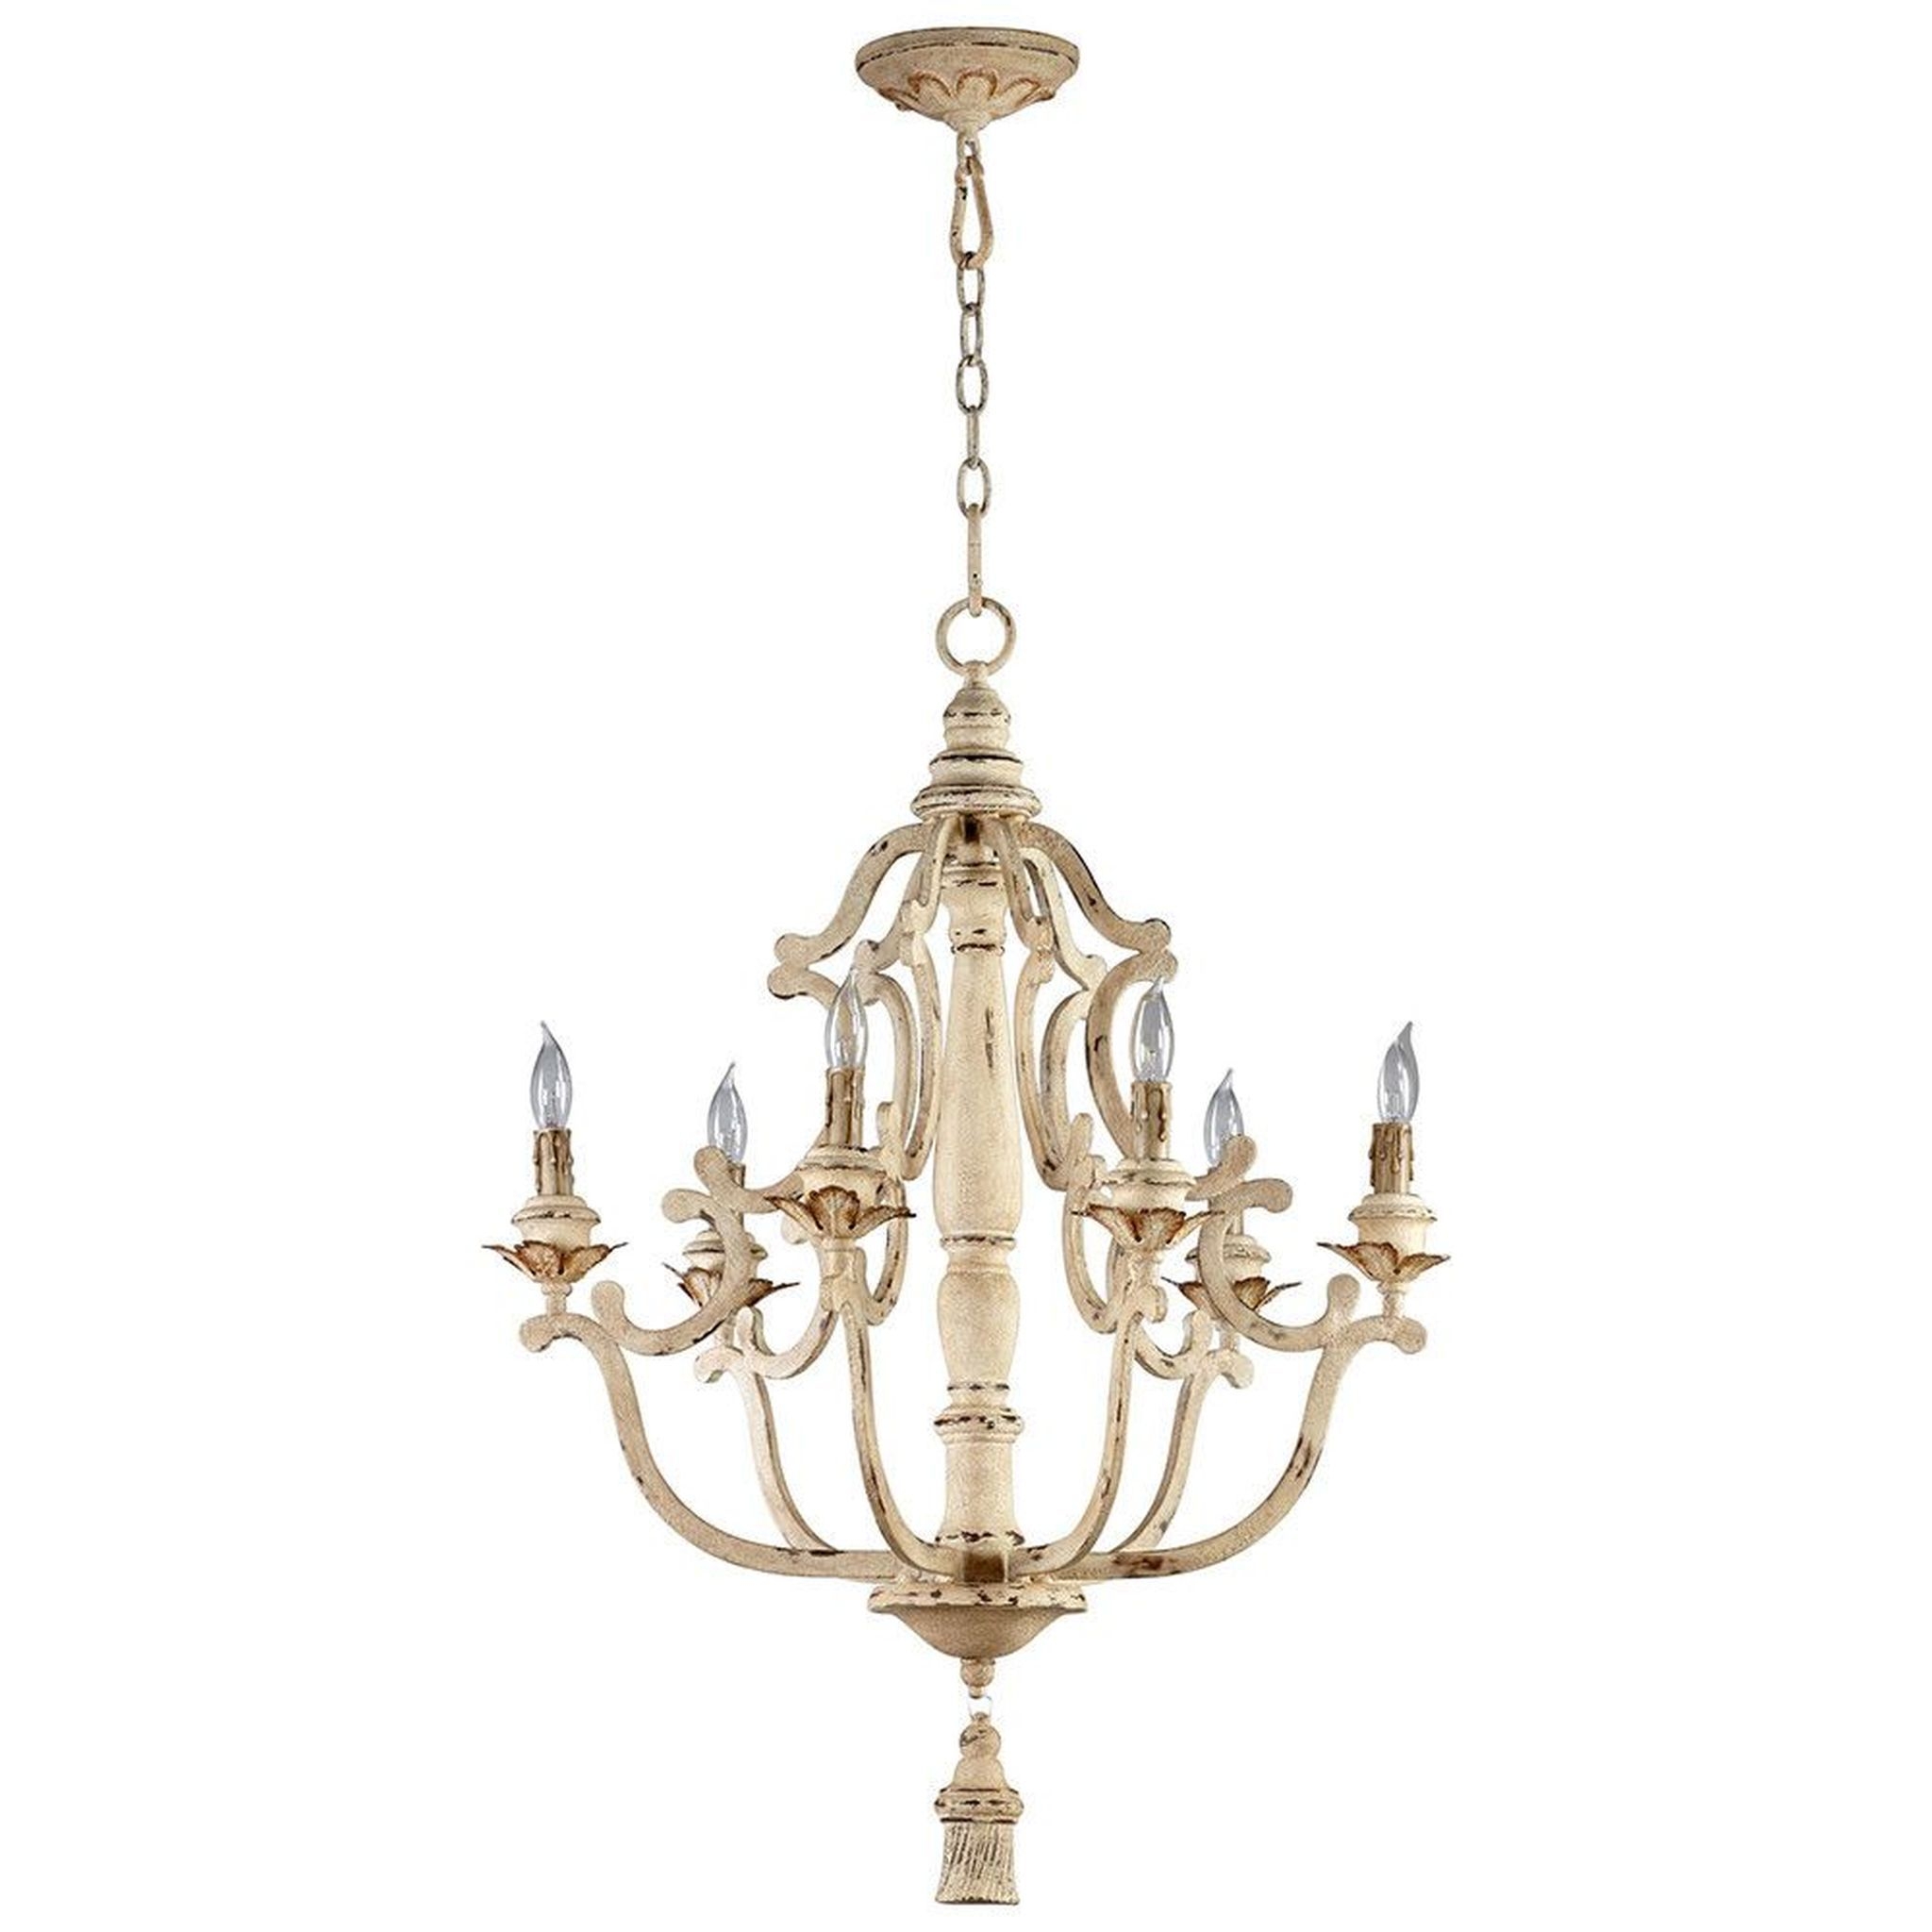 French country antique white 6 light chandelier wrought iron wood